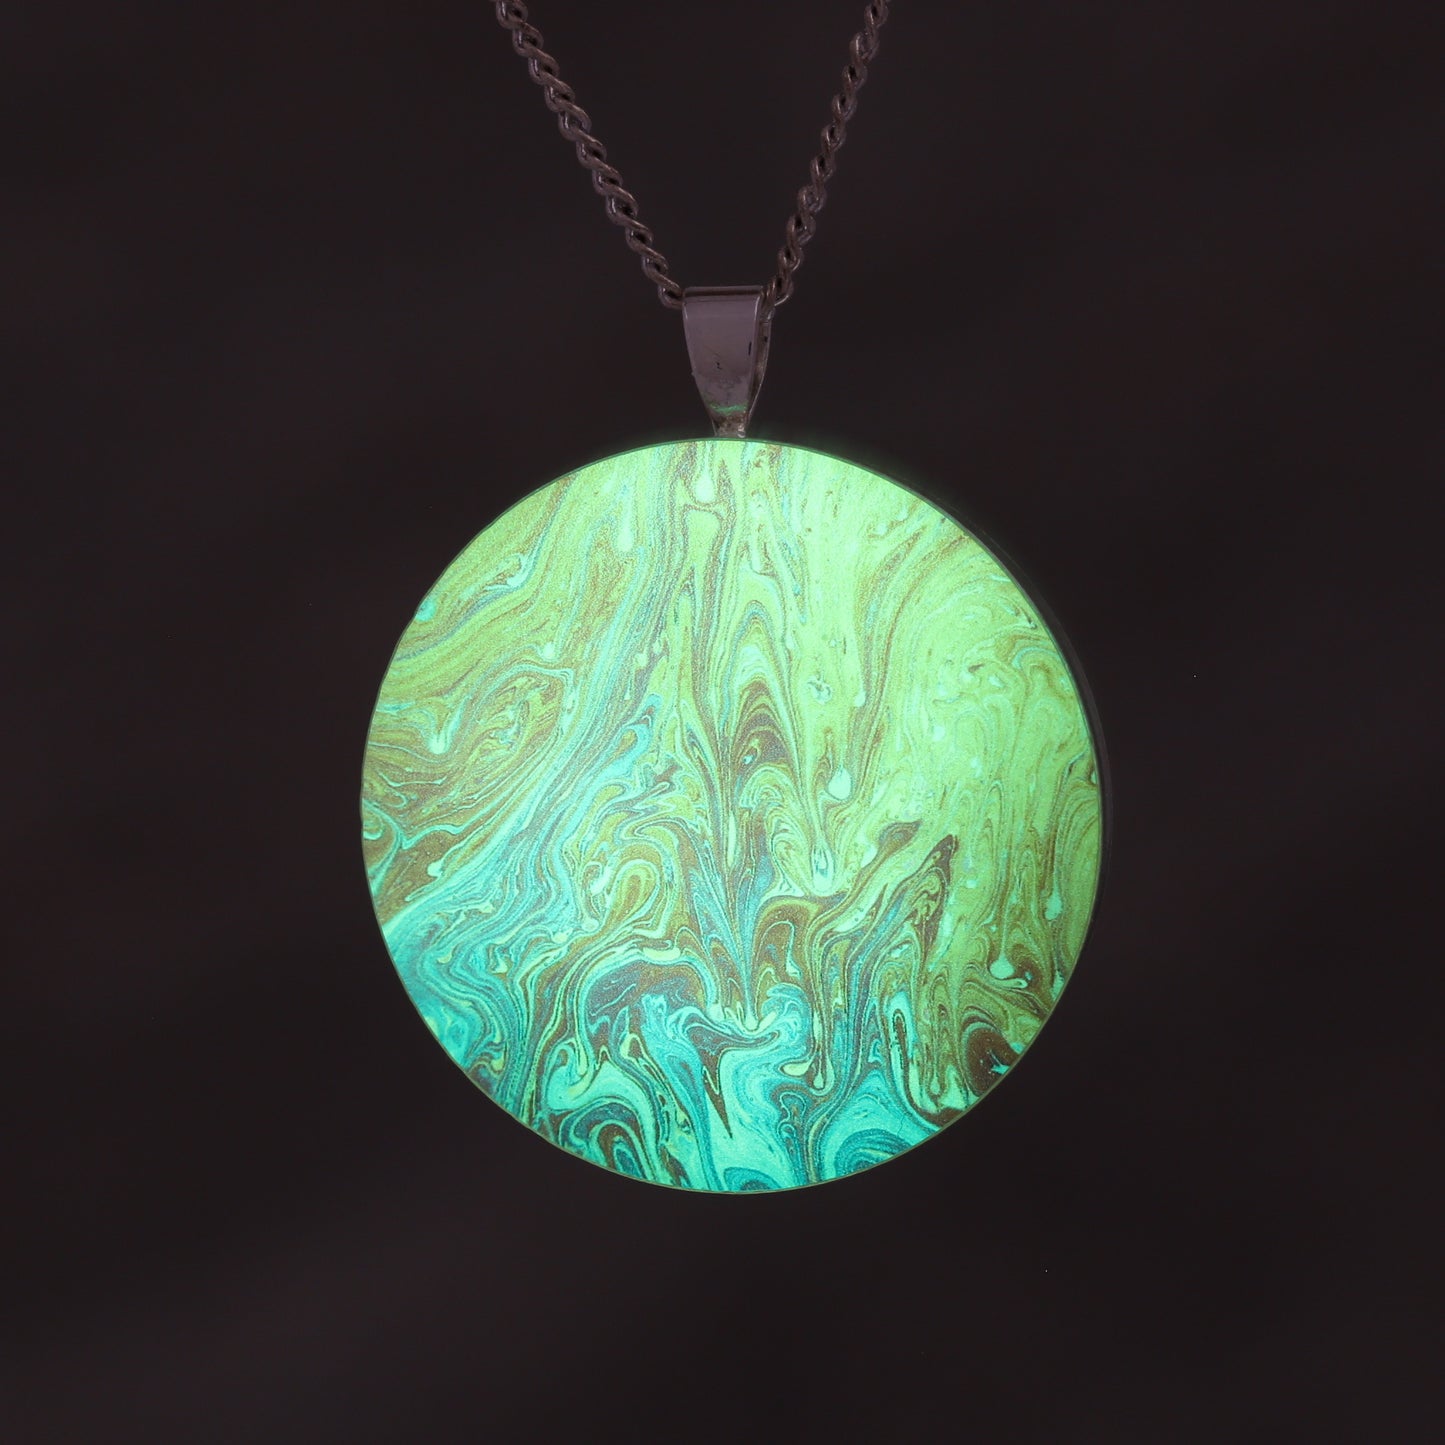 Crimson Rain - Glow-in-the-dark pendant with a beautiful abstract soap film pattern